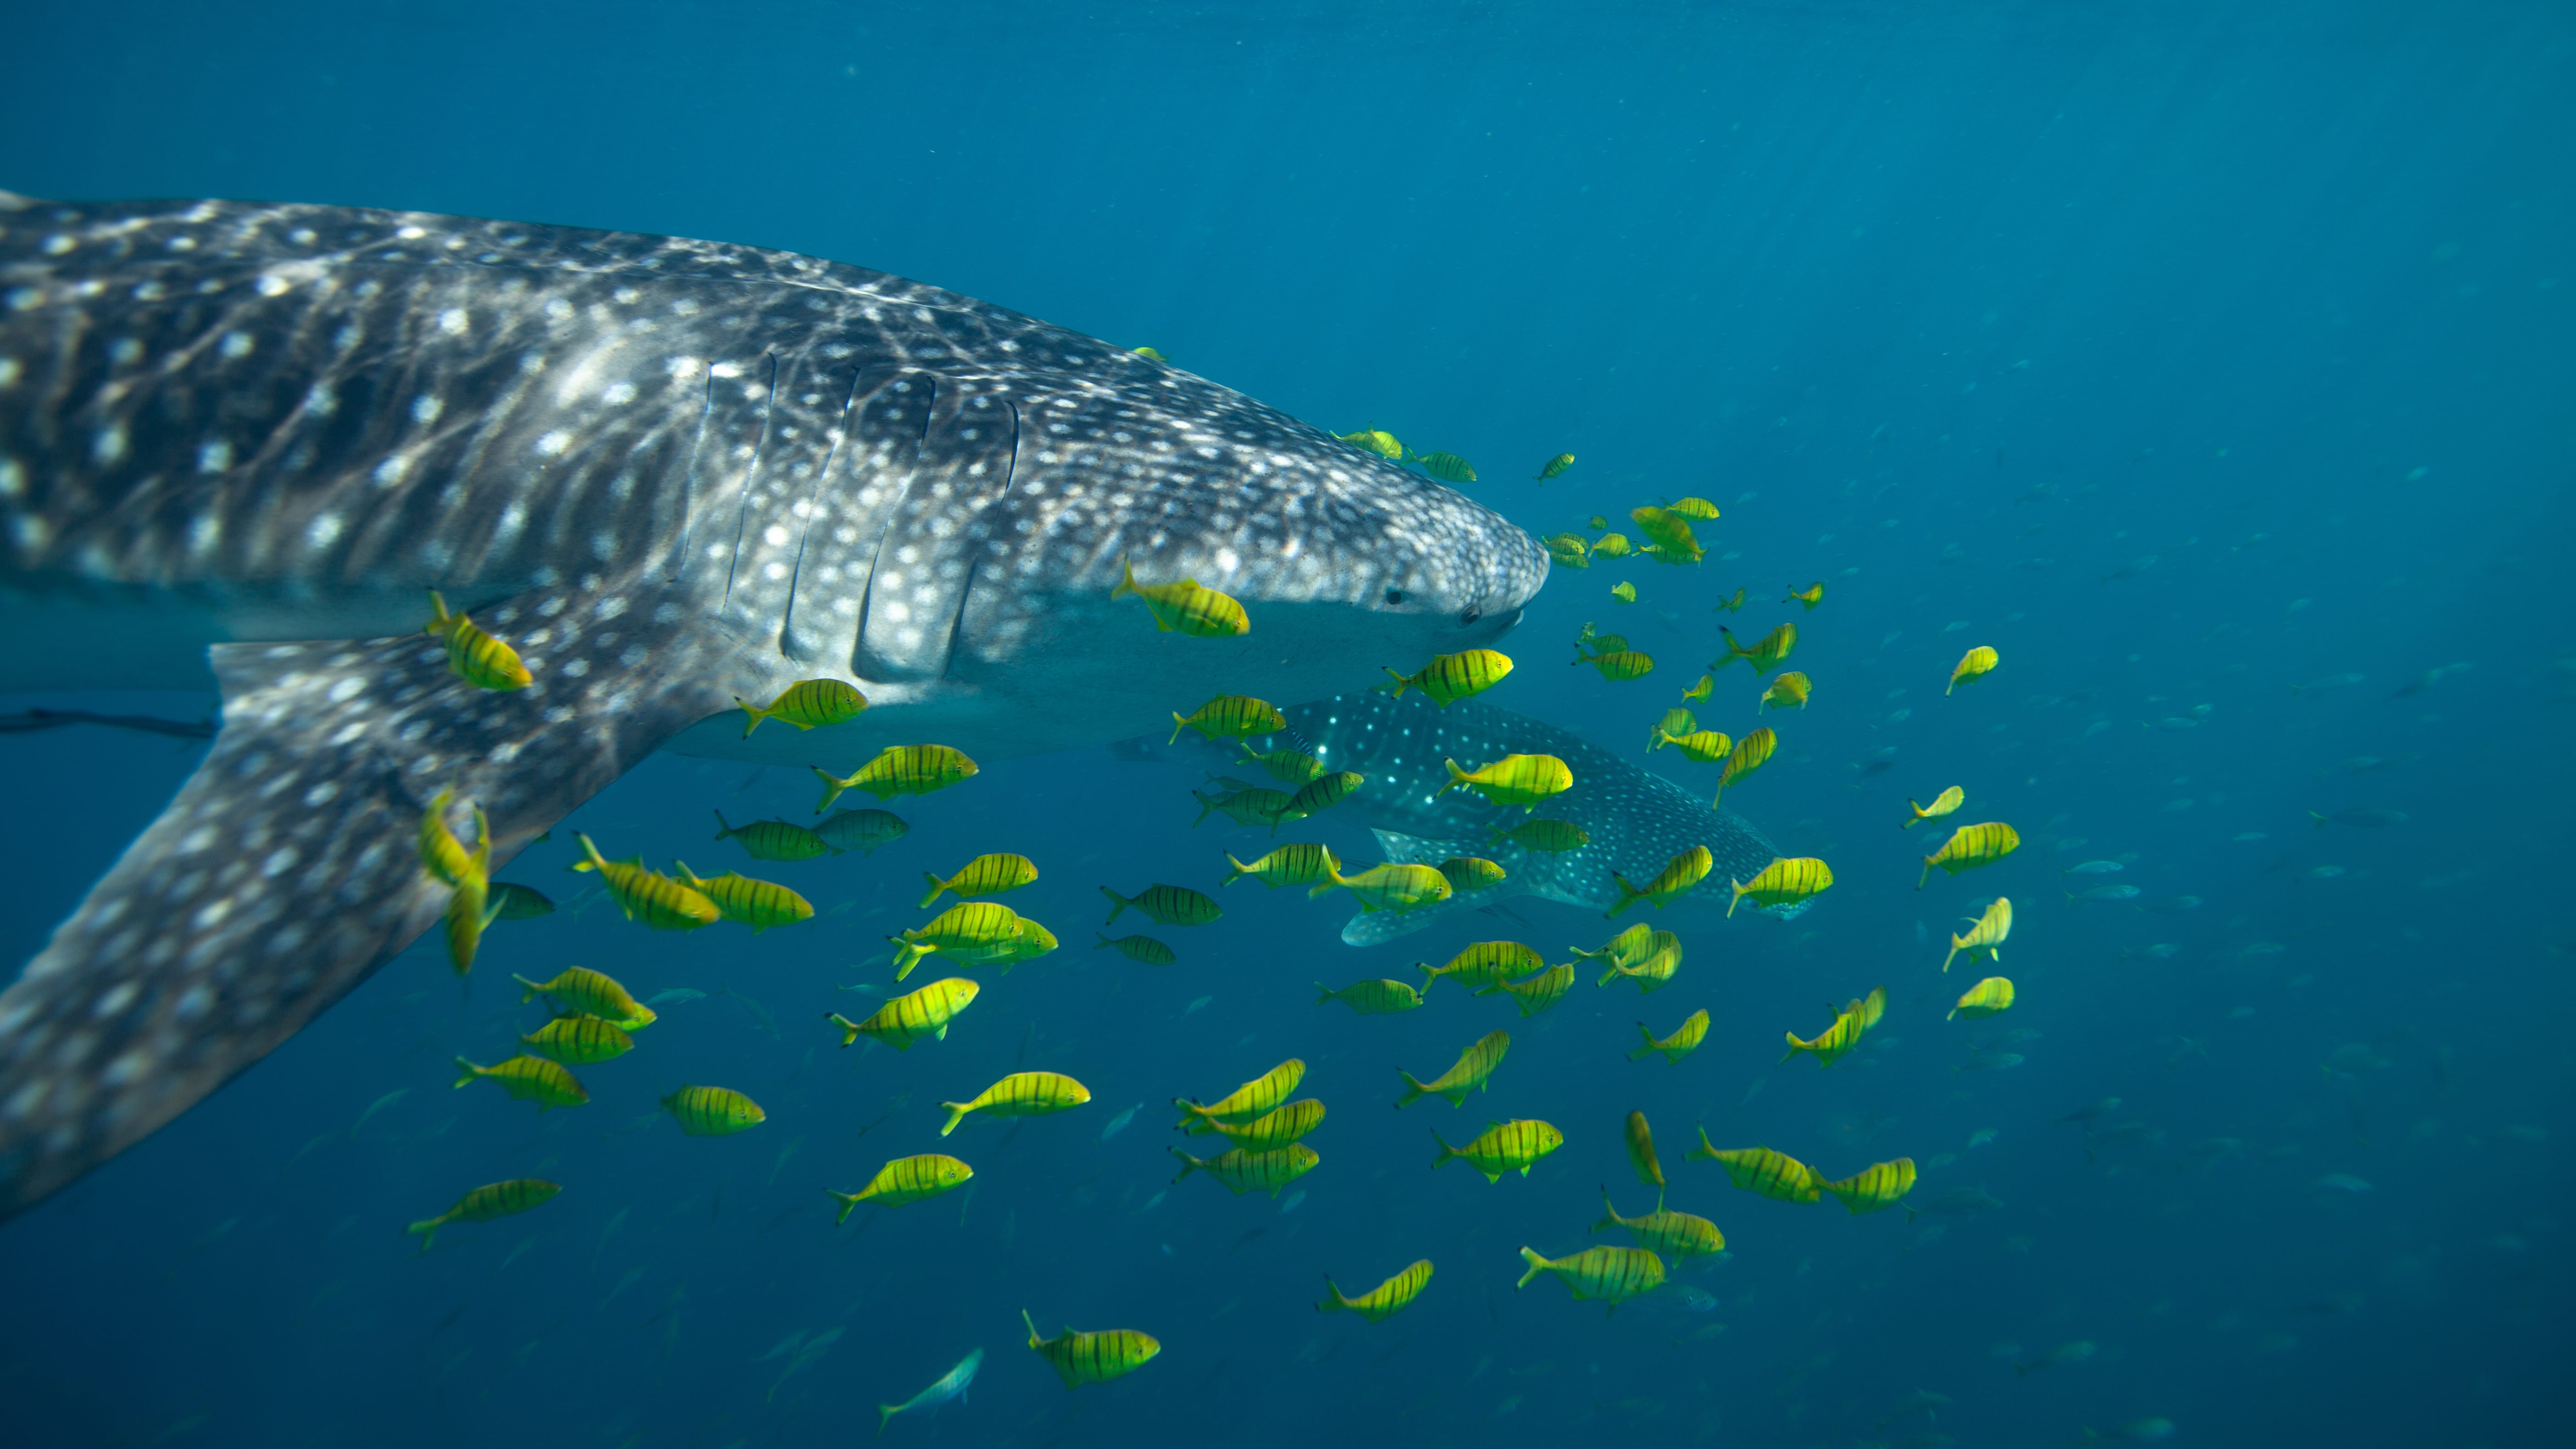 A whale shark swims near Shib Habil reef in the Red Sea. (Photo by Simon Thorrold, Woods Hole Oceanographic Institution)